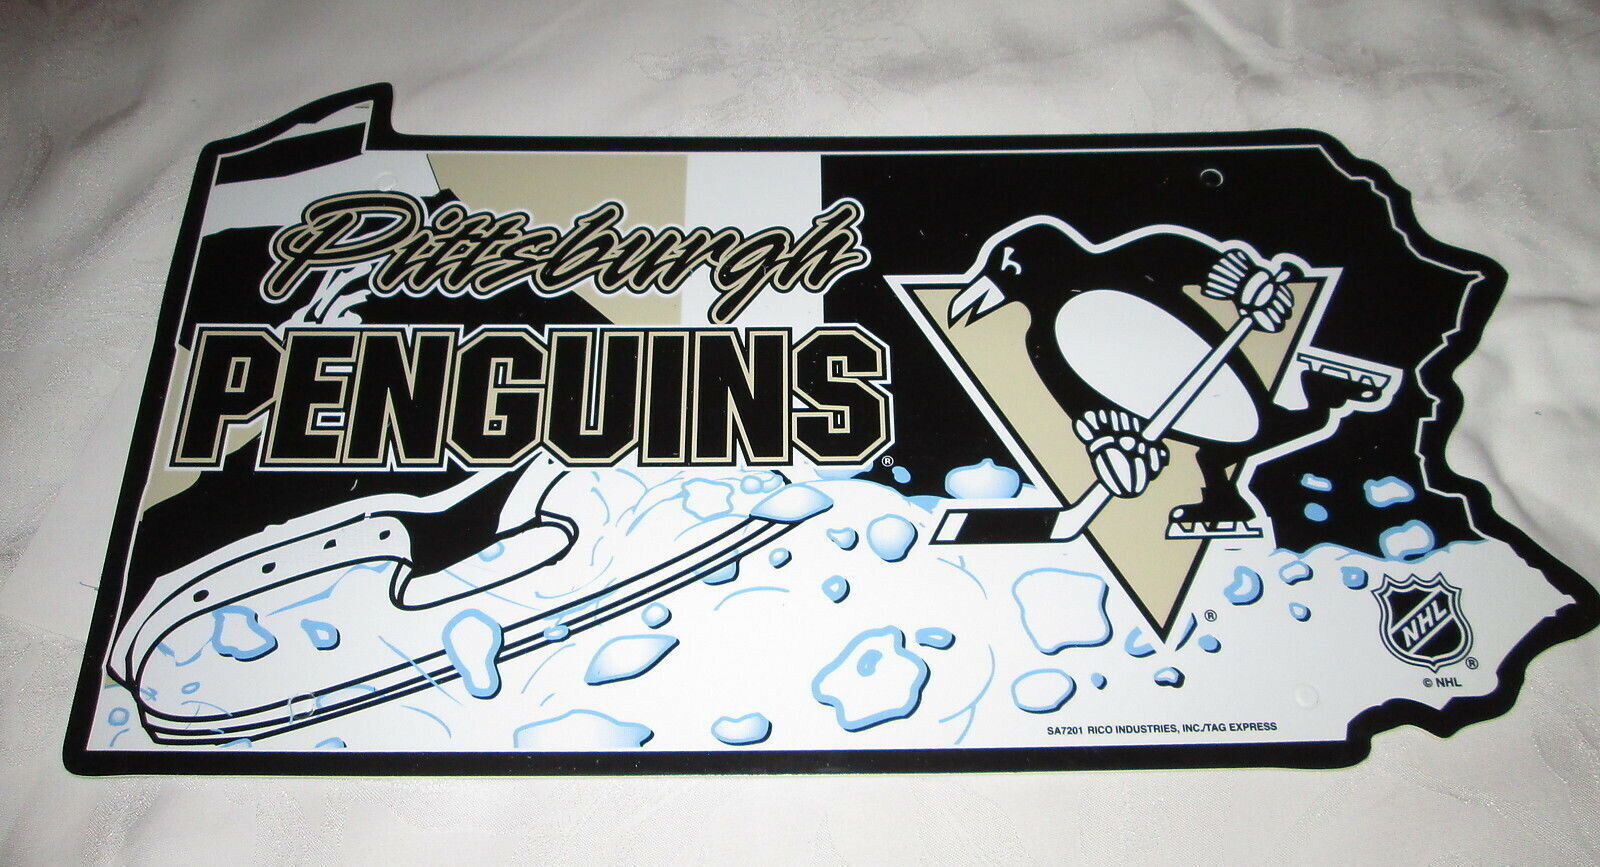 PITTSBURGH PENGUINS - PENNSYLVANIA STATE SHAPED SIGN #6 - NEW